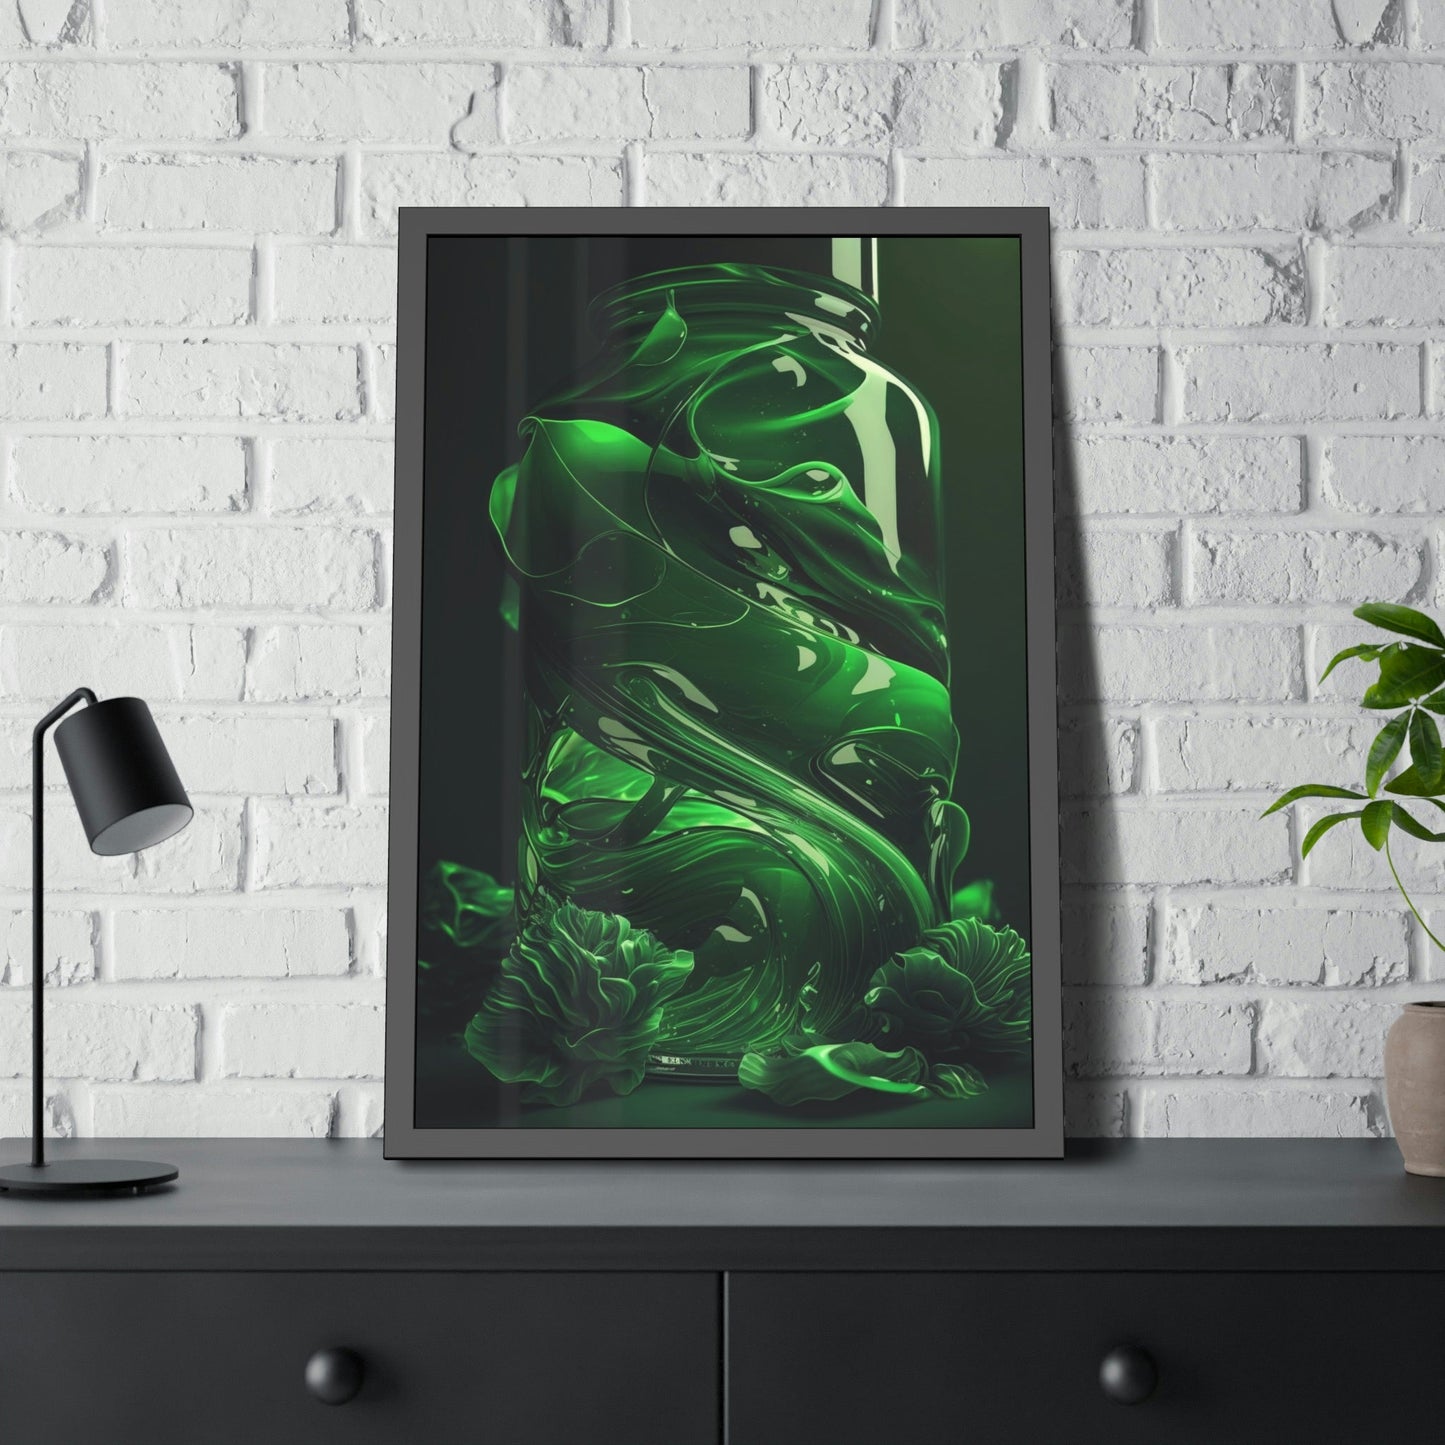 Shades of Green: Abstract Canvas Painting for Modern Interiors